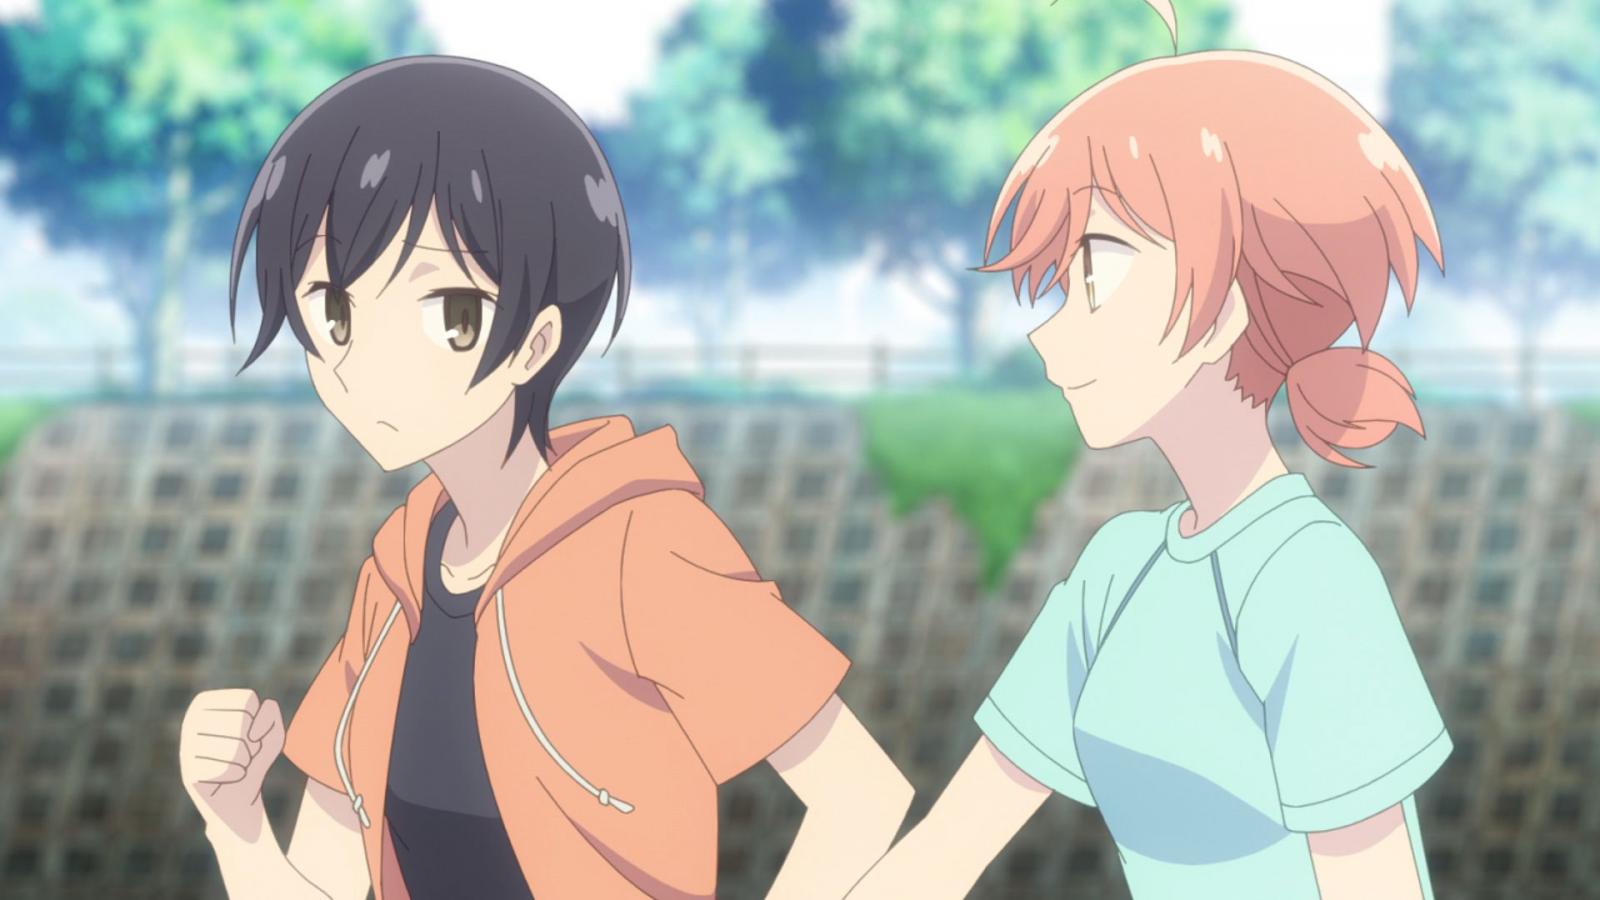 Bloom Into You - Gesamtedition - Volume 1-3: Episode 01-13 [Blu-ray] Image 7